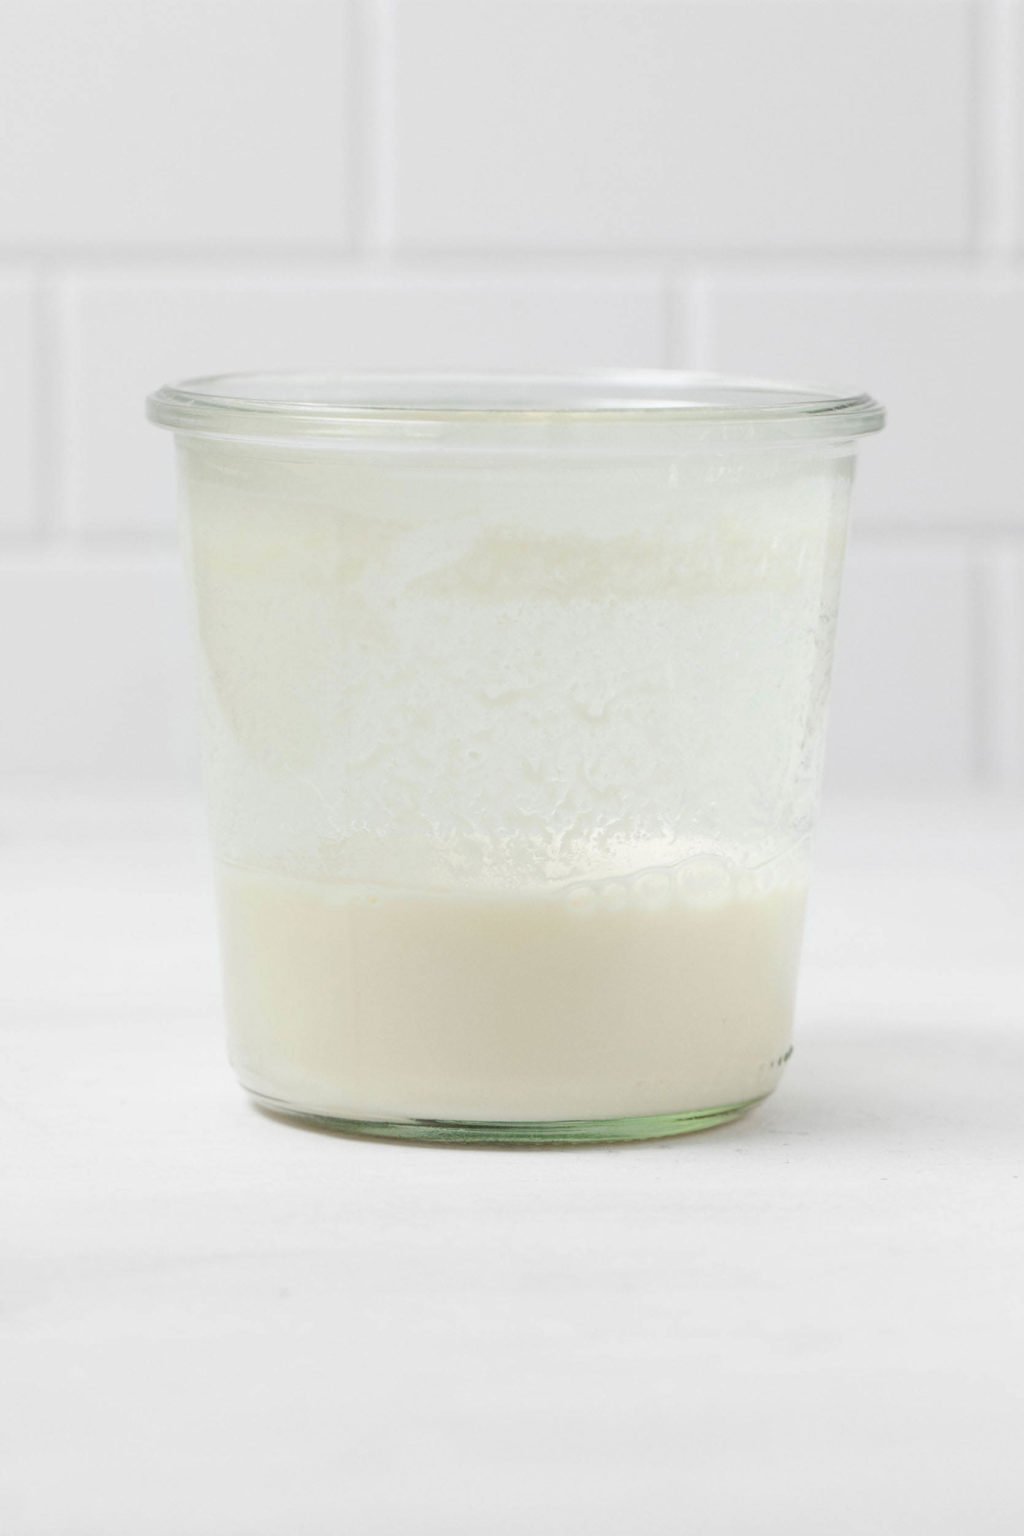 A glass jar of homemade vegan buttermilk rests on a white surface.